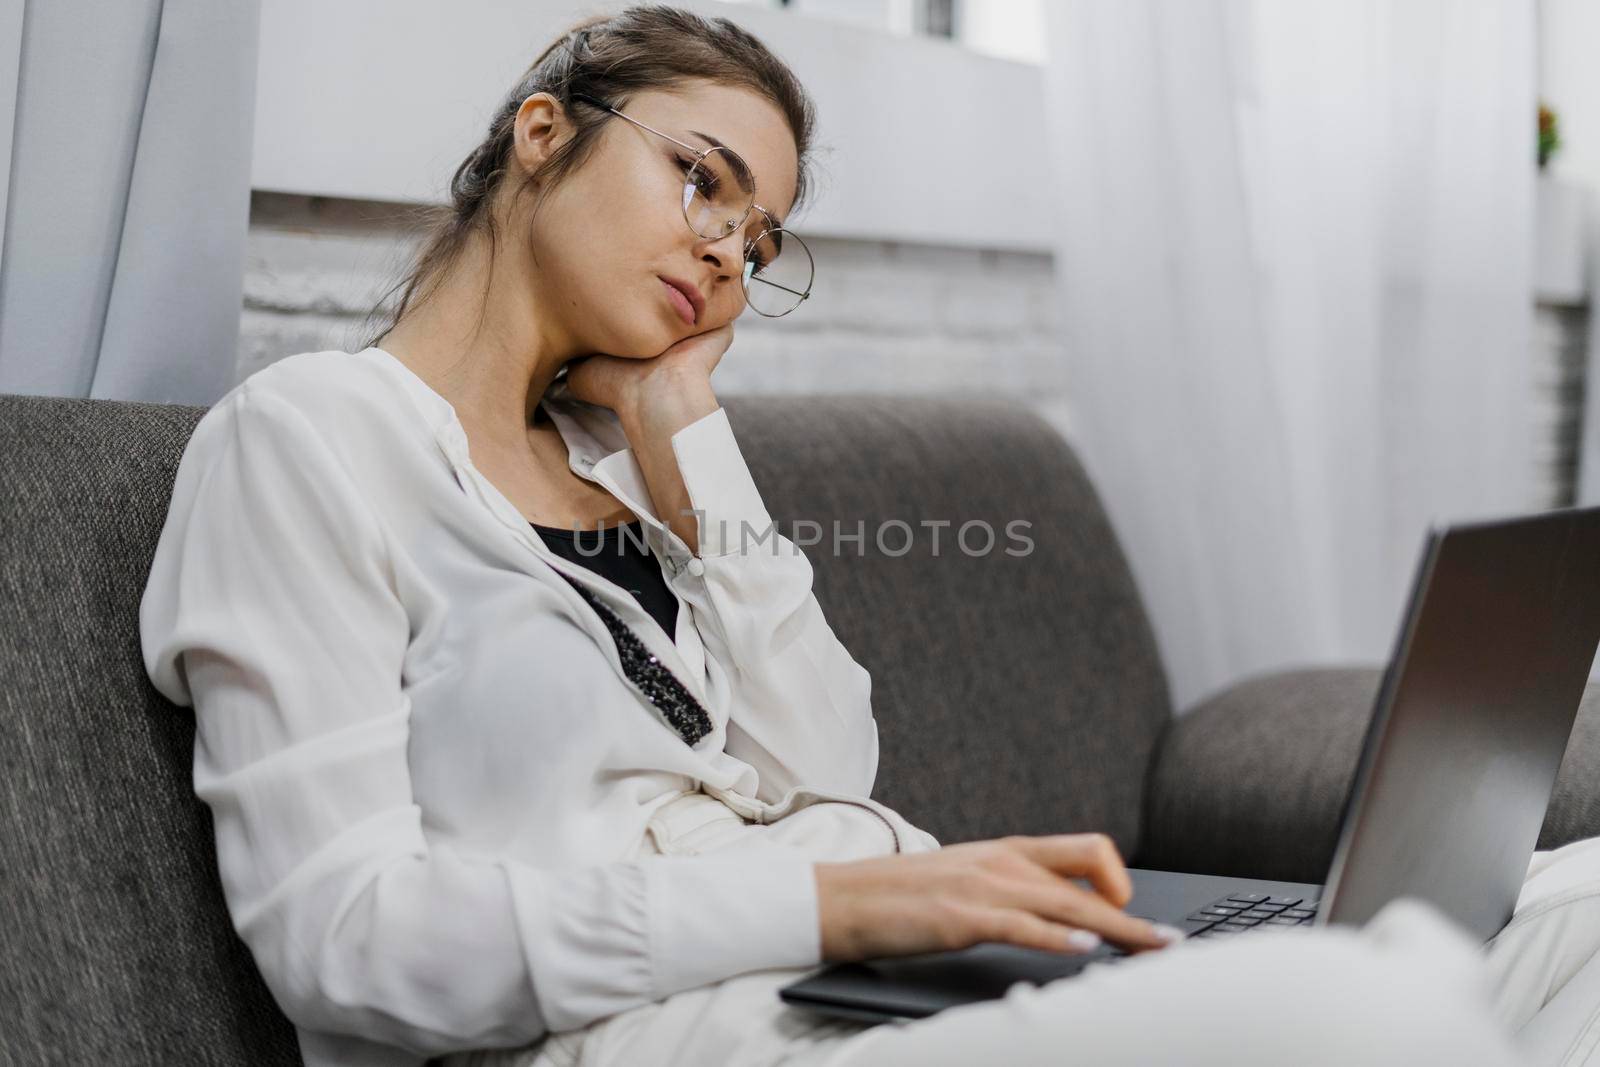 woman looking bored while working by Zahard